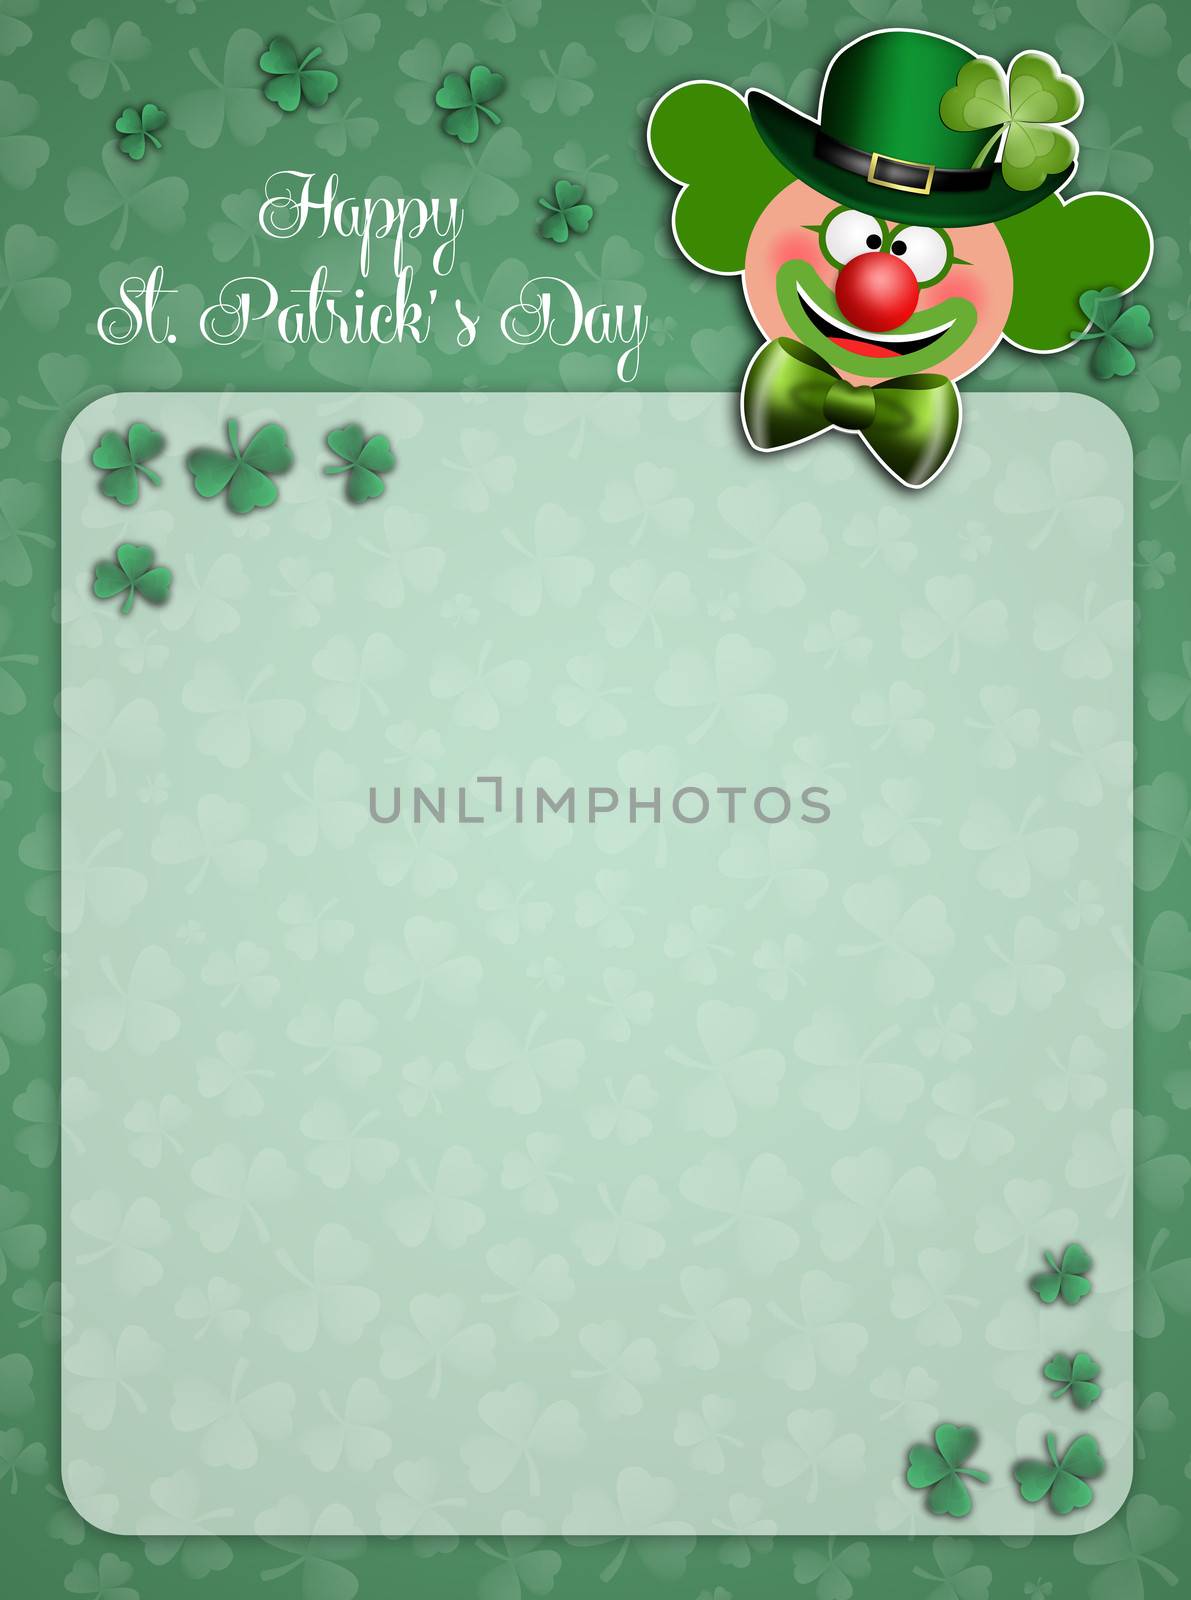 green clown in St. Patrick's Day by sognolucido